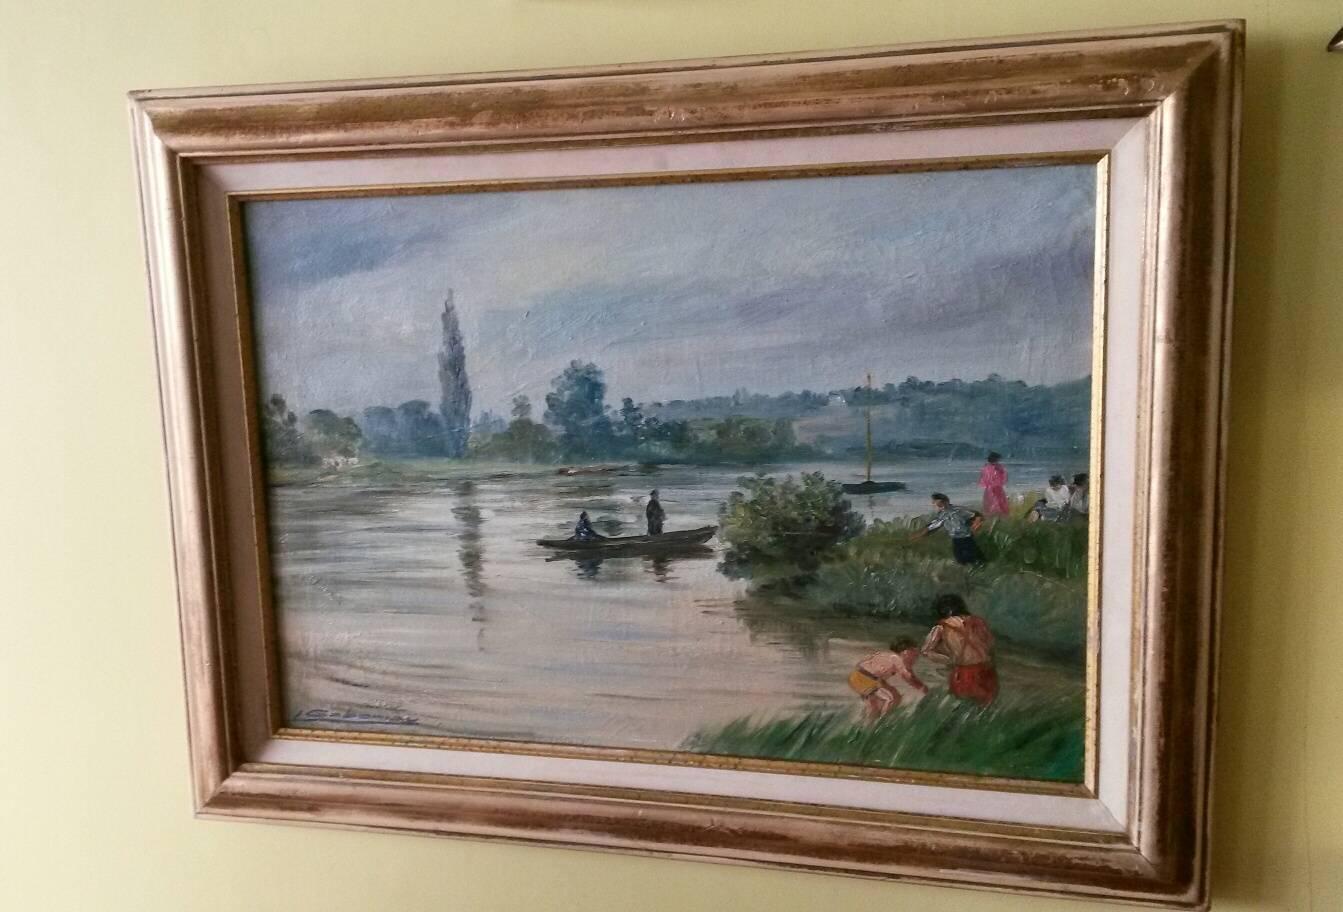 French Post Impressionist Seine River Landscape Painting by Gaboriau - Post-Impressionist Art by Unknown